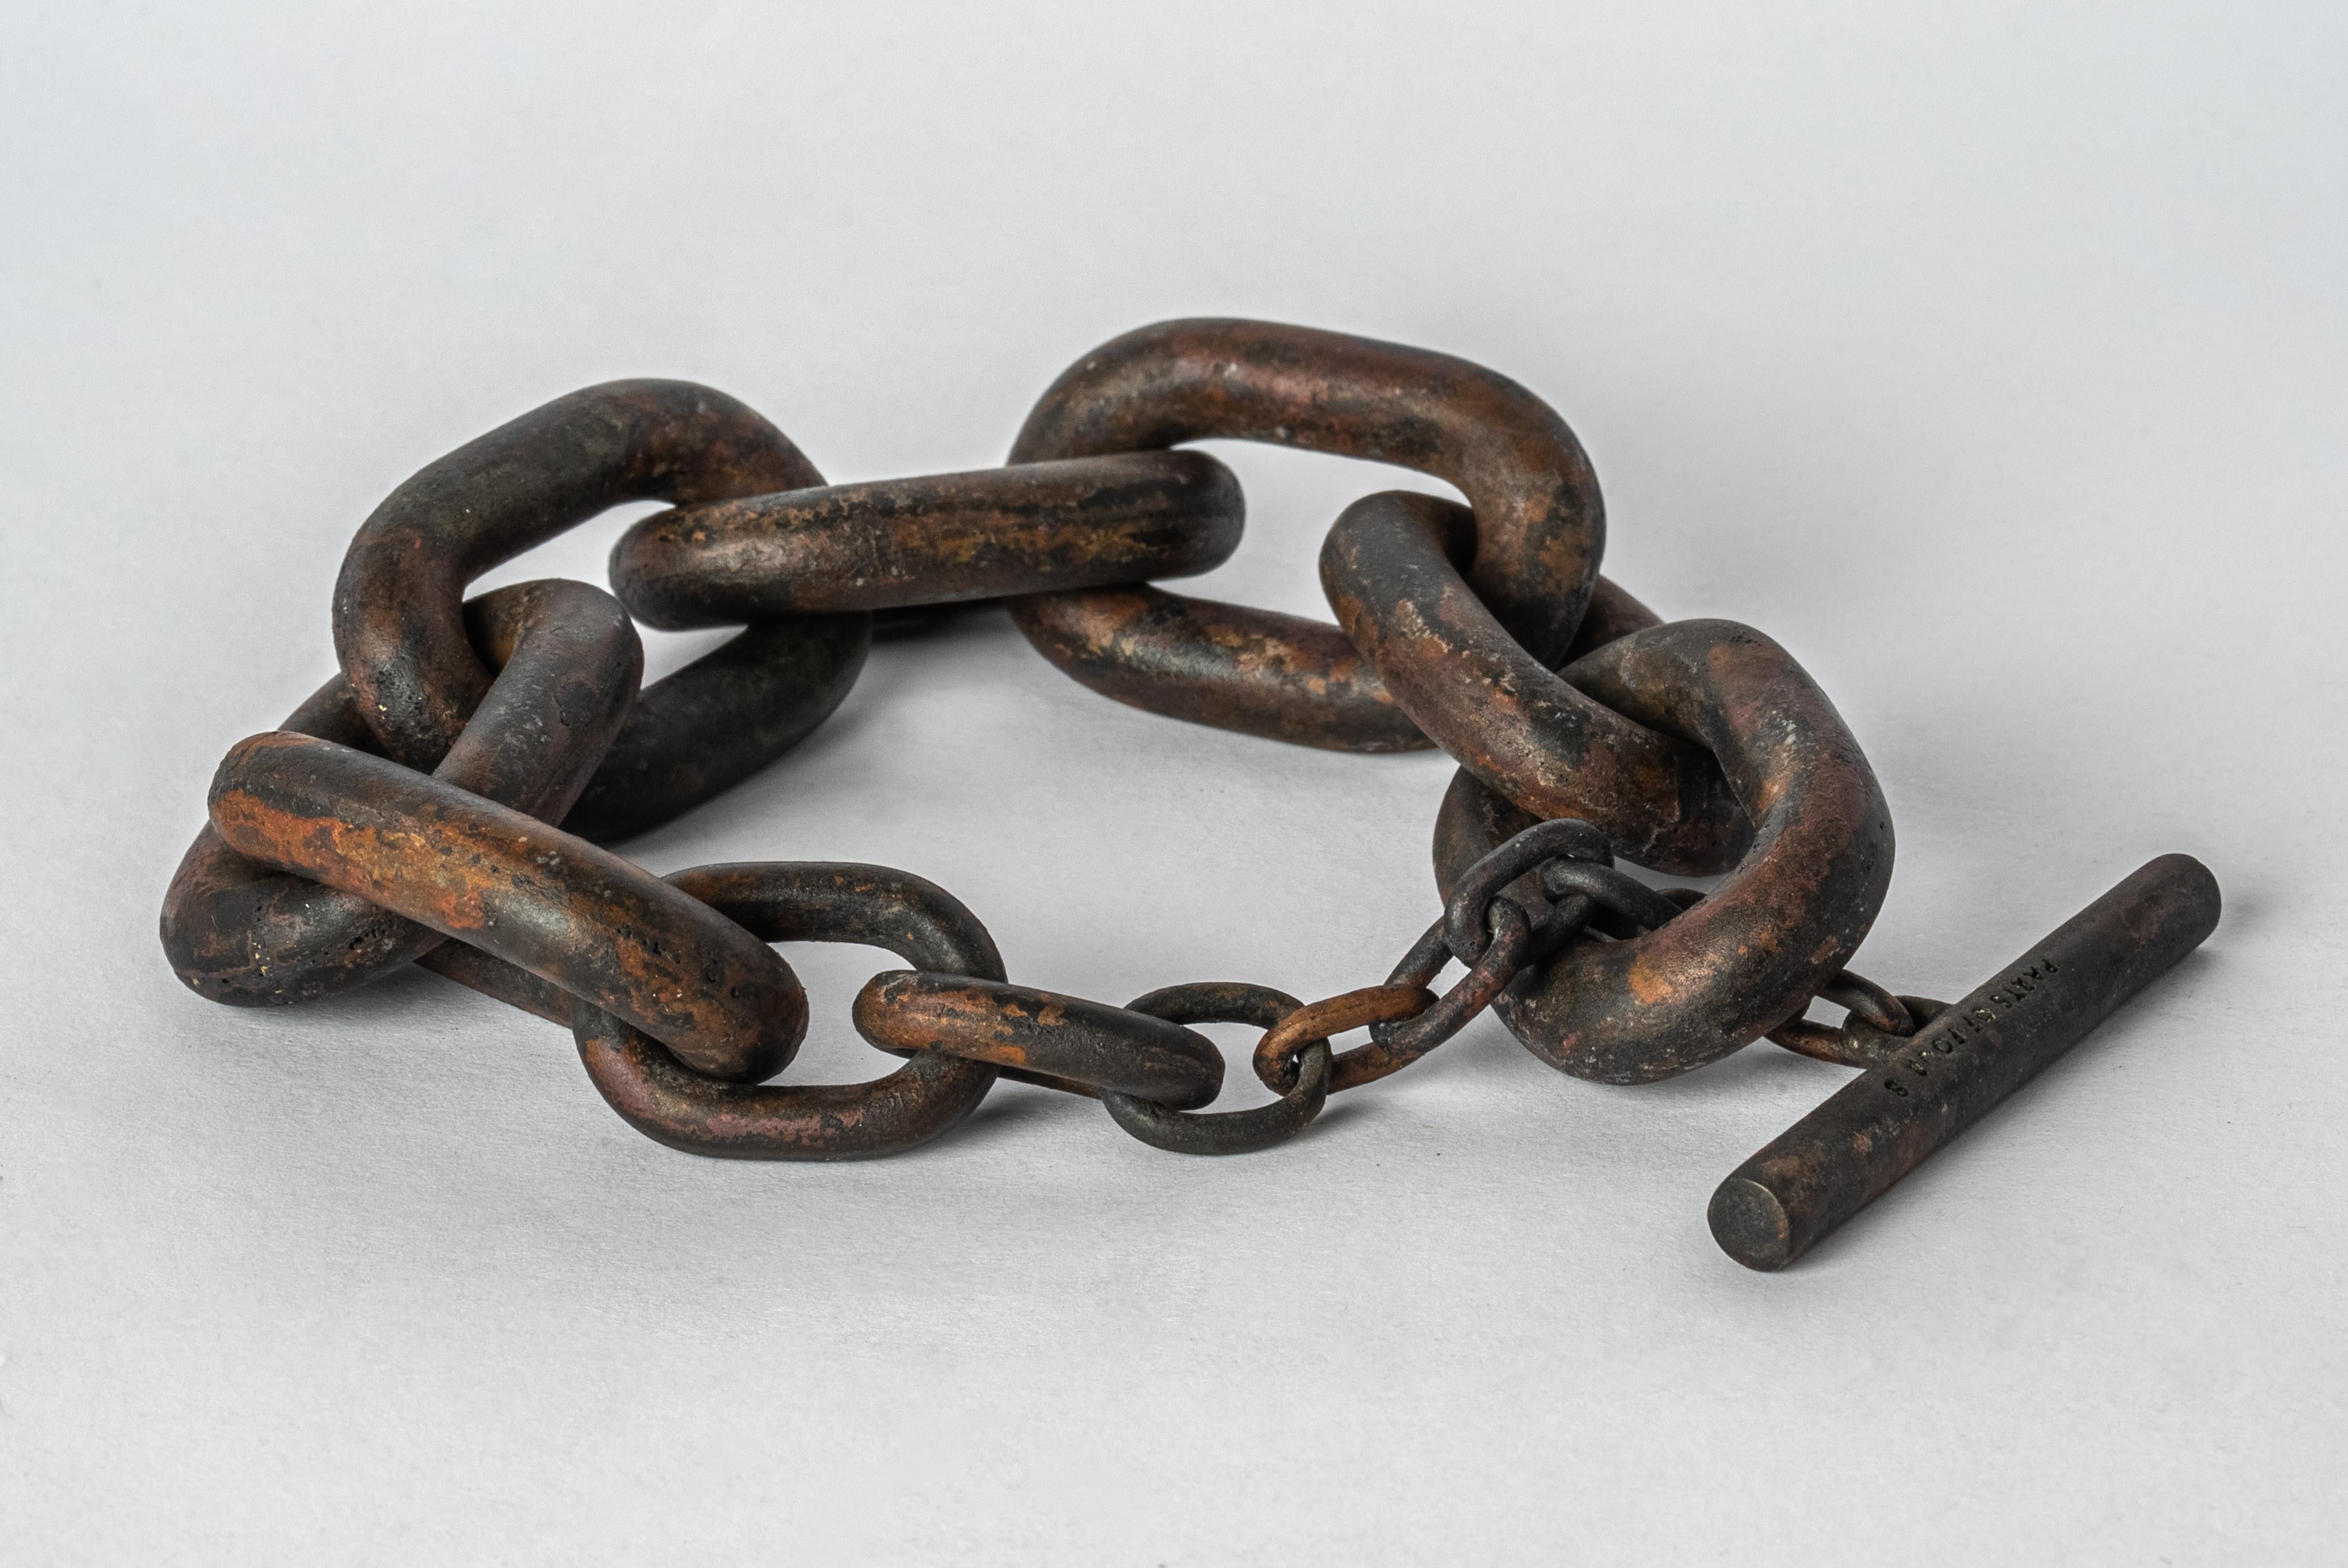 Bracelet in burned brass. This patina occurs from within, no chemical was added to the surface.
Dimensions :
Chain link size (L × H): 33 mm × 22 mm
Toggle length: 40 mm